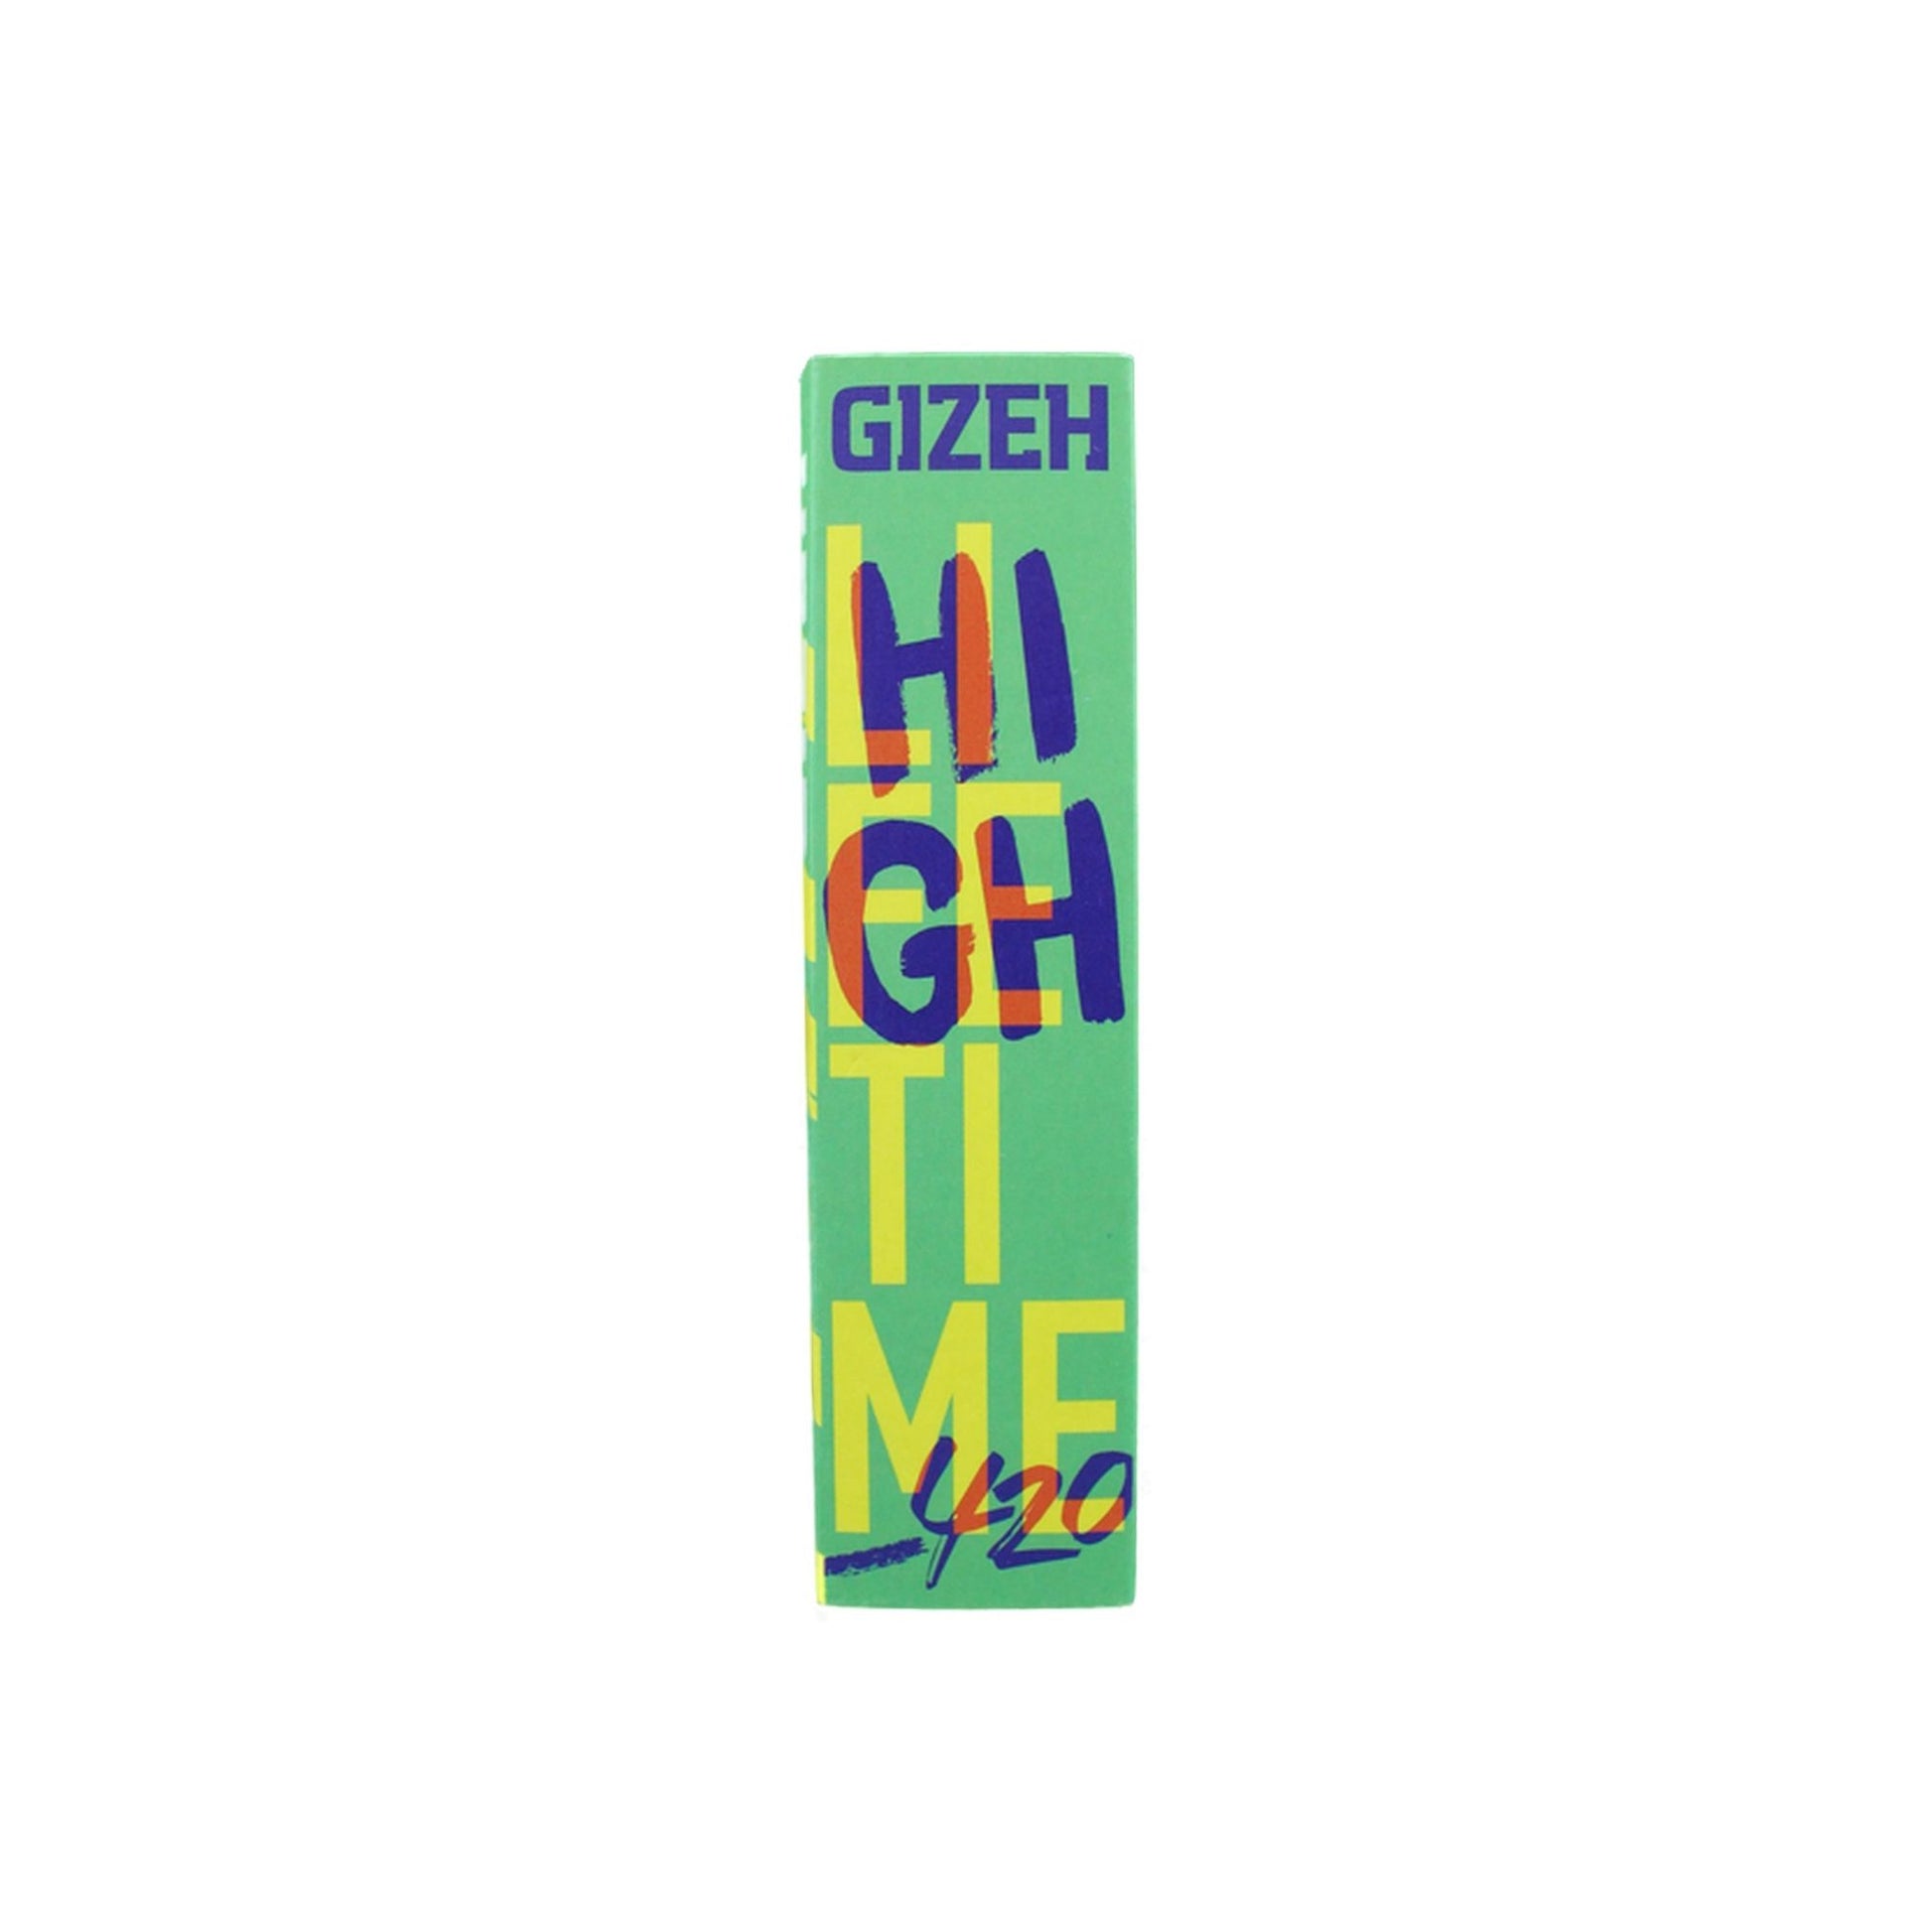 GIZEH 420 Limited Edition King Size Slim and Tips 